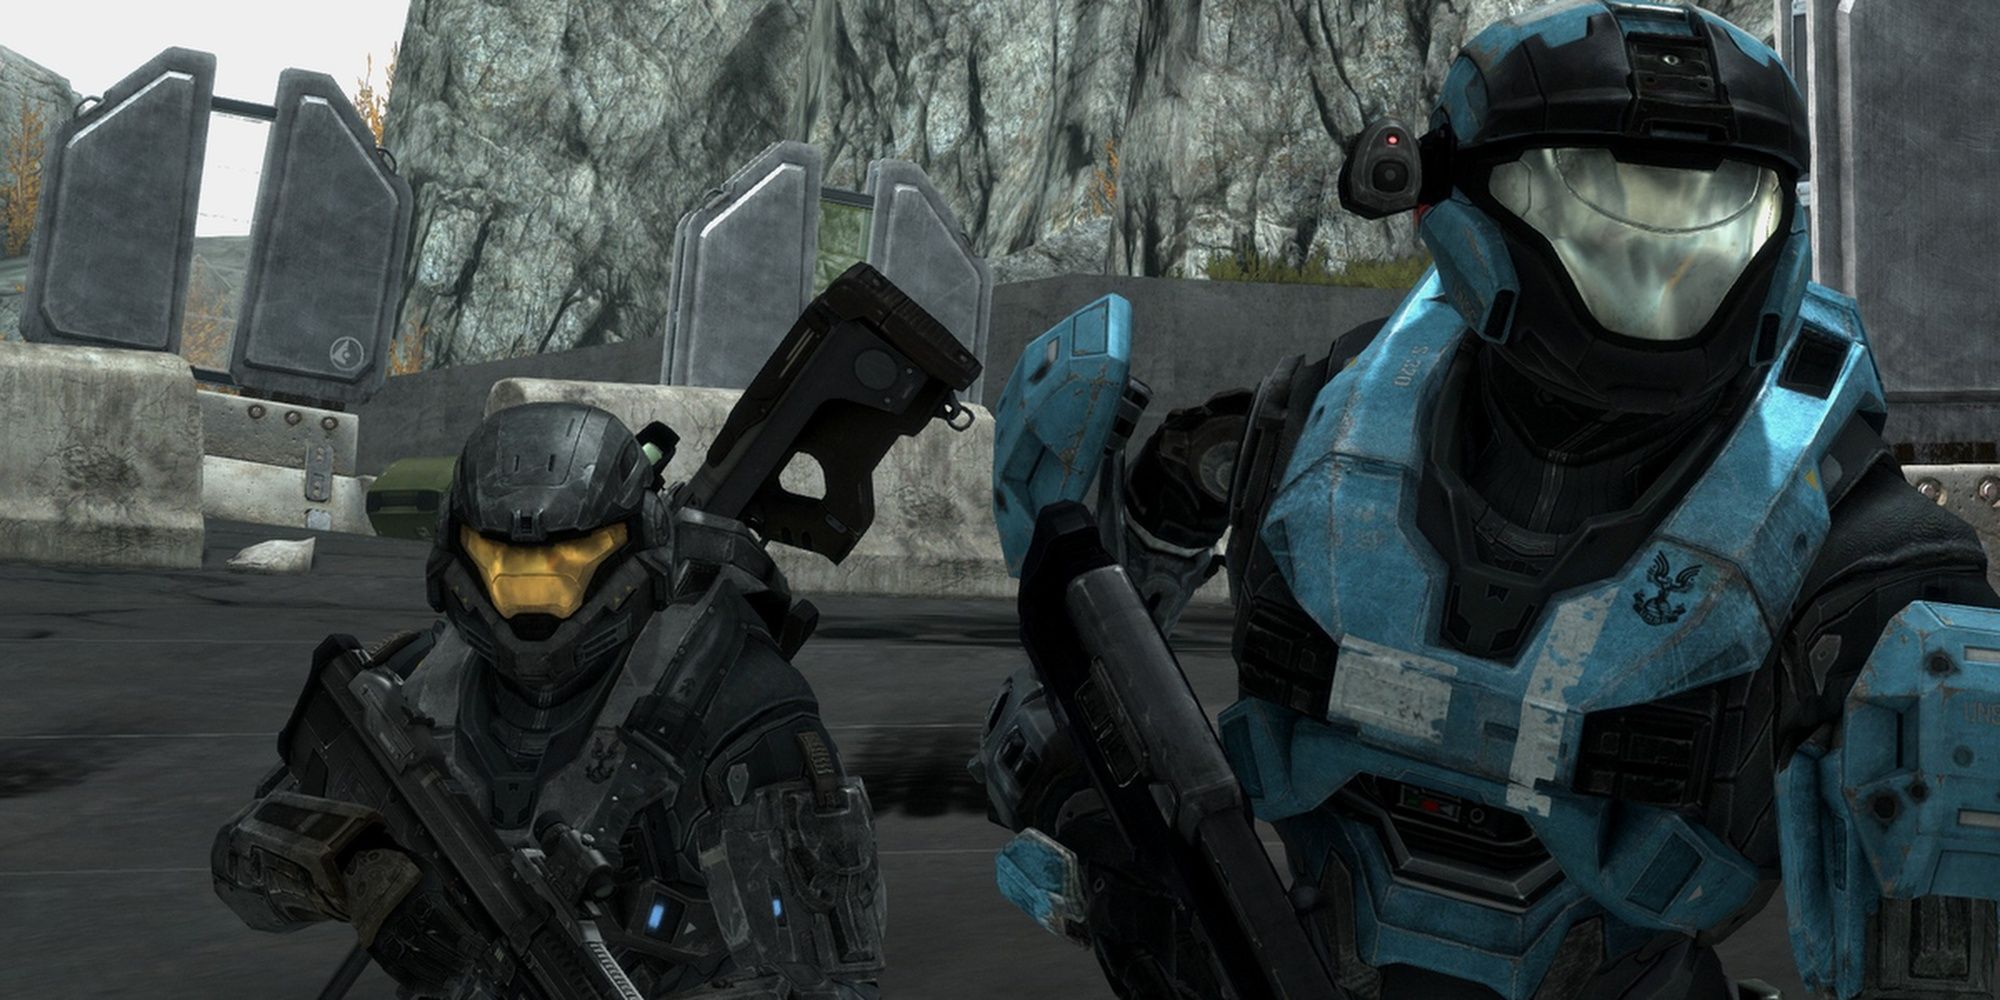 Halo: The Expendable Spartan Team from Halo Fall Of Reach